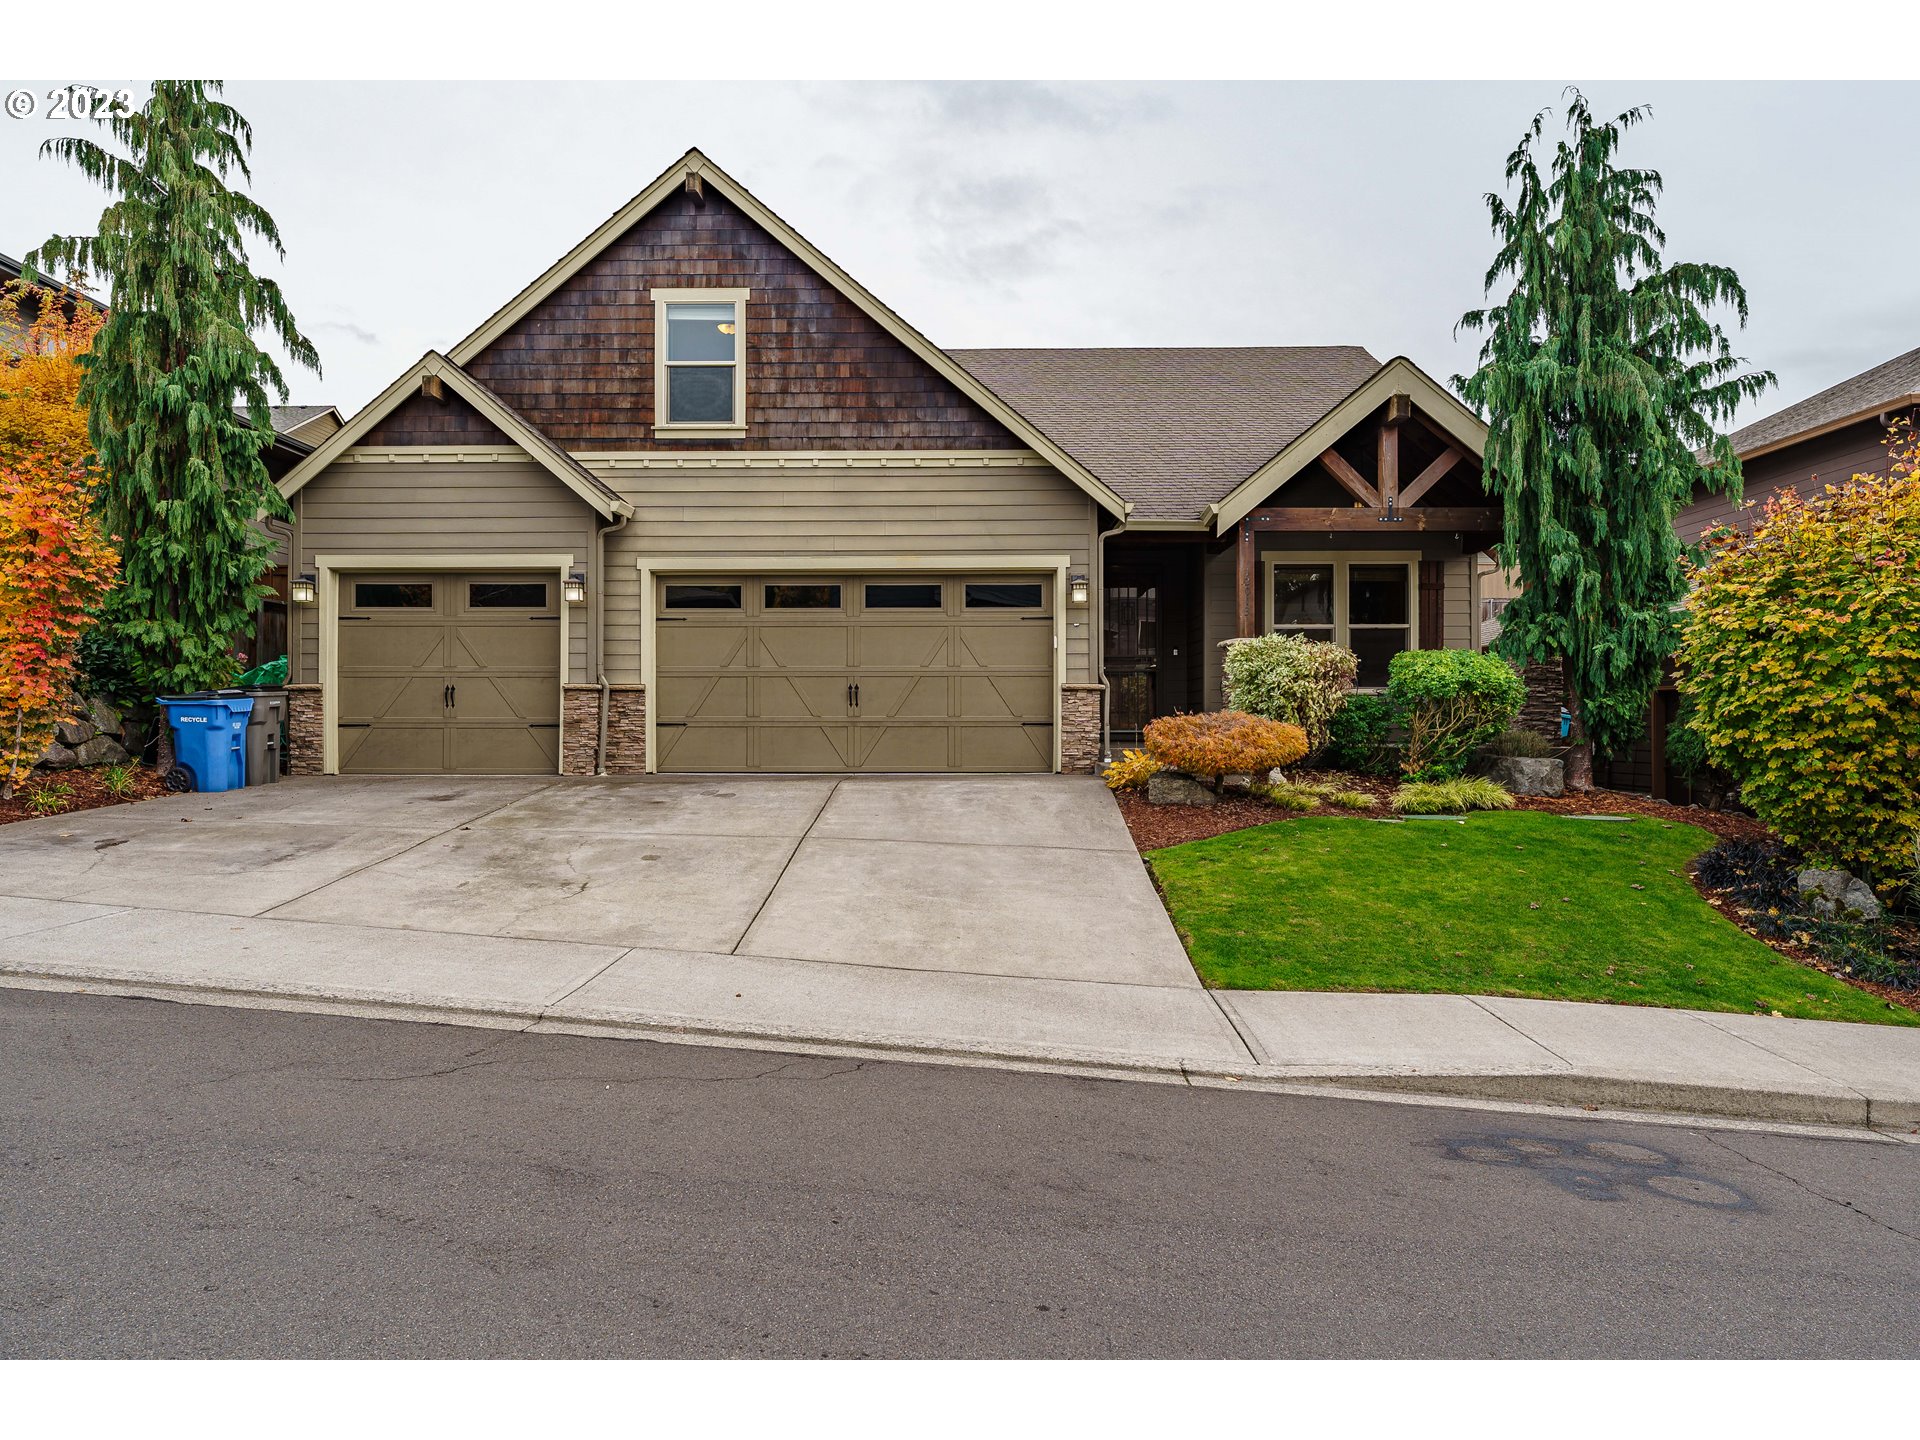 12013 NW 42nd Ave, Vancouver, WA 98685